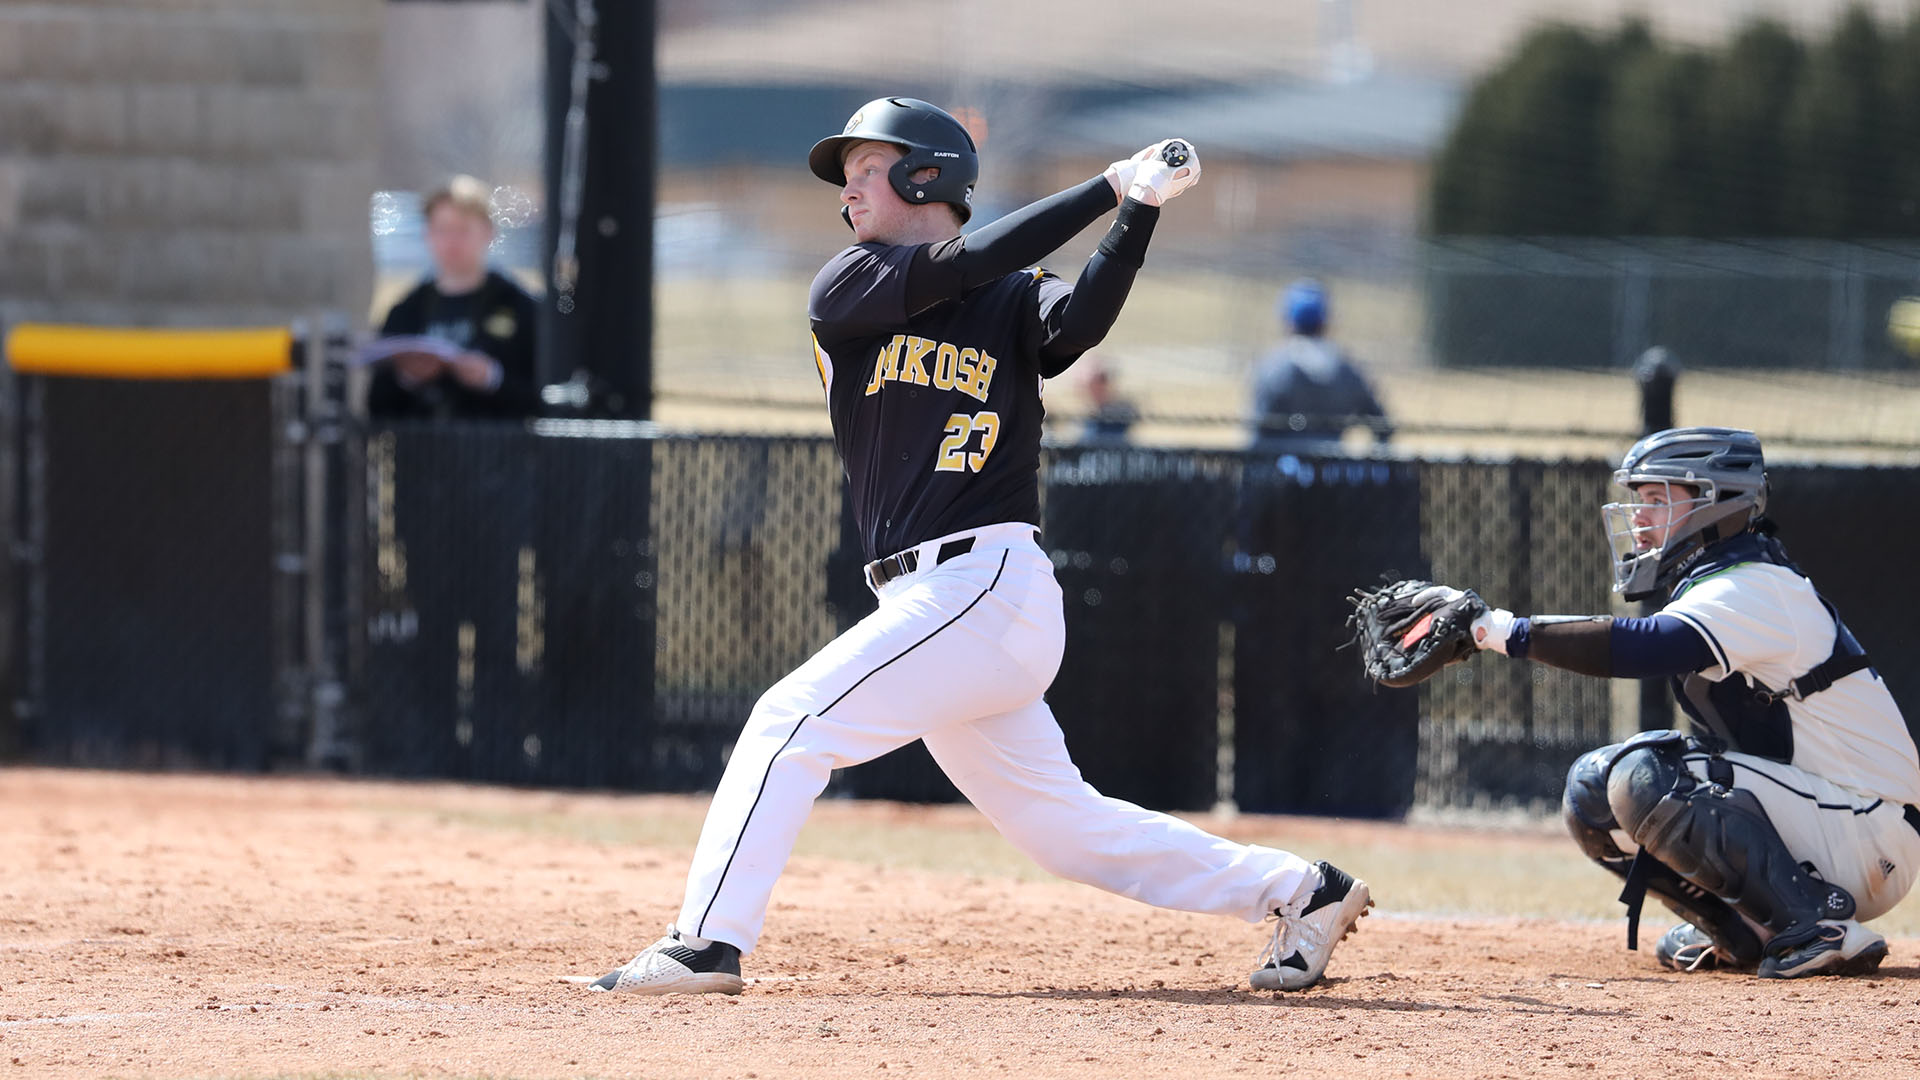 Connor Giusti had two hits during each game against UW-Stevens Point, including a solo home run in the opener.